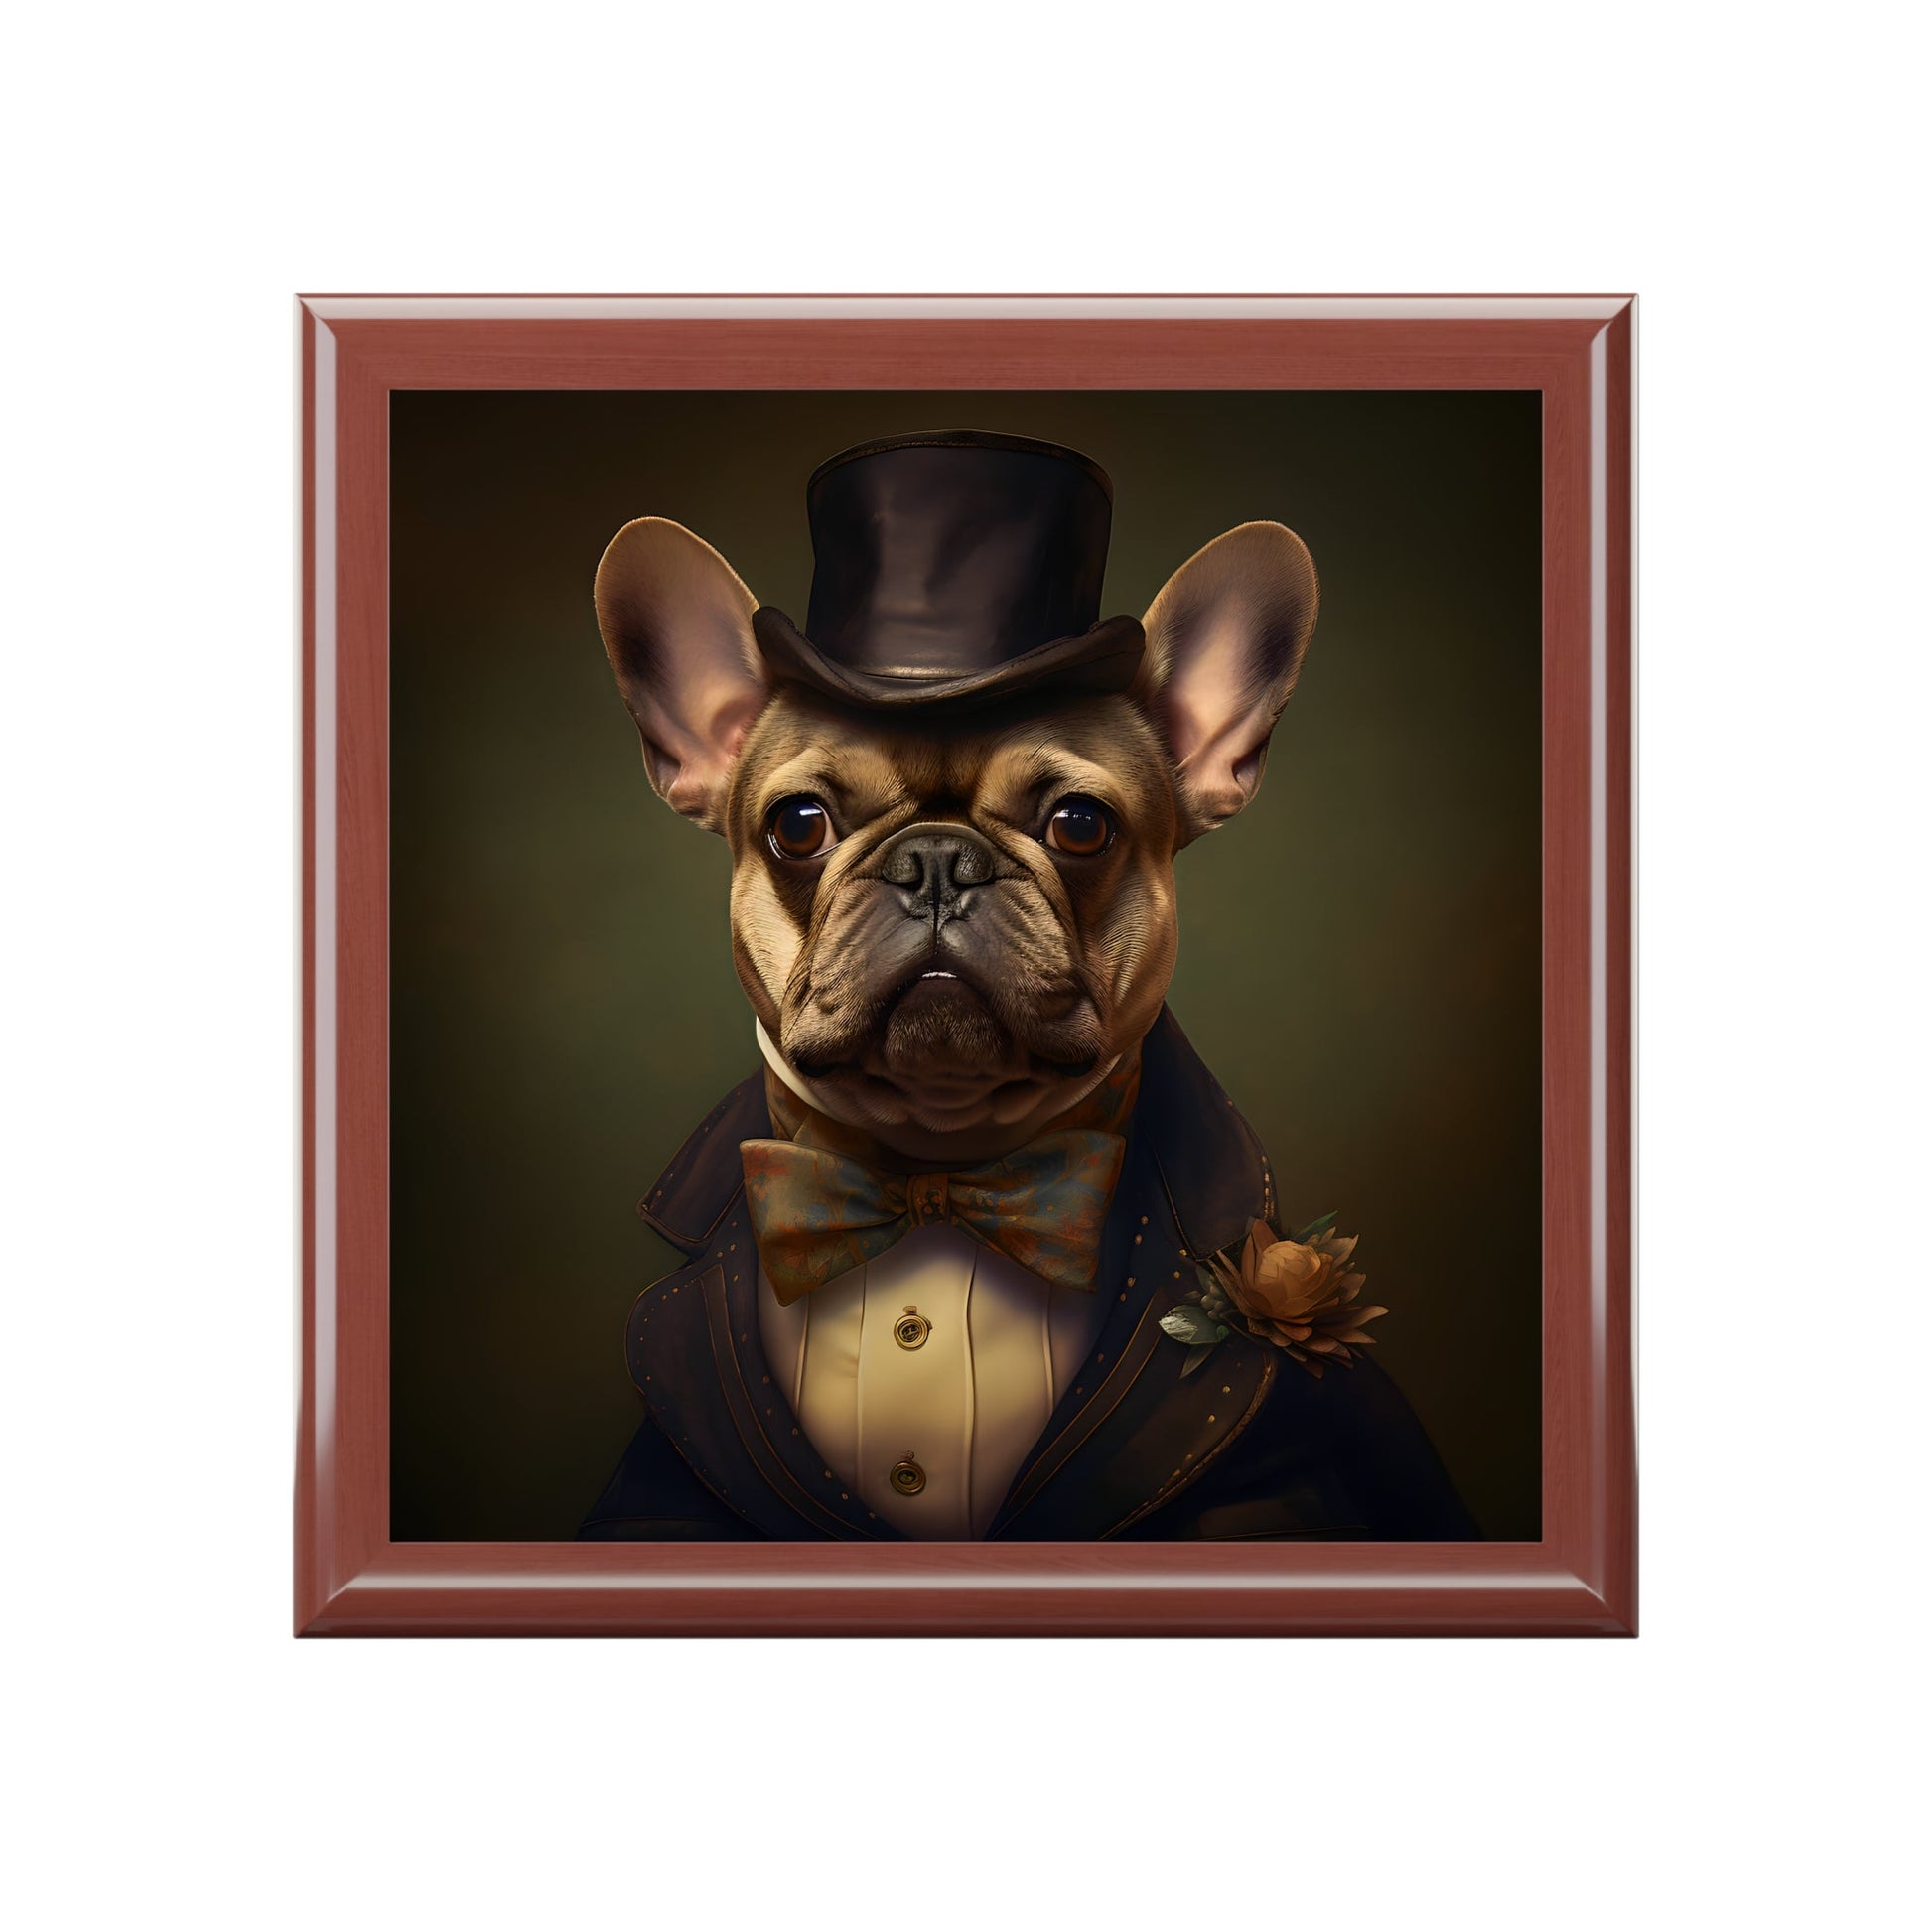 French Bulldog Wearing a Top Hat Art Print Gift and Jewelry Box